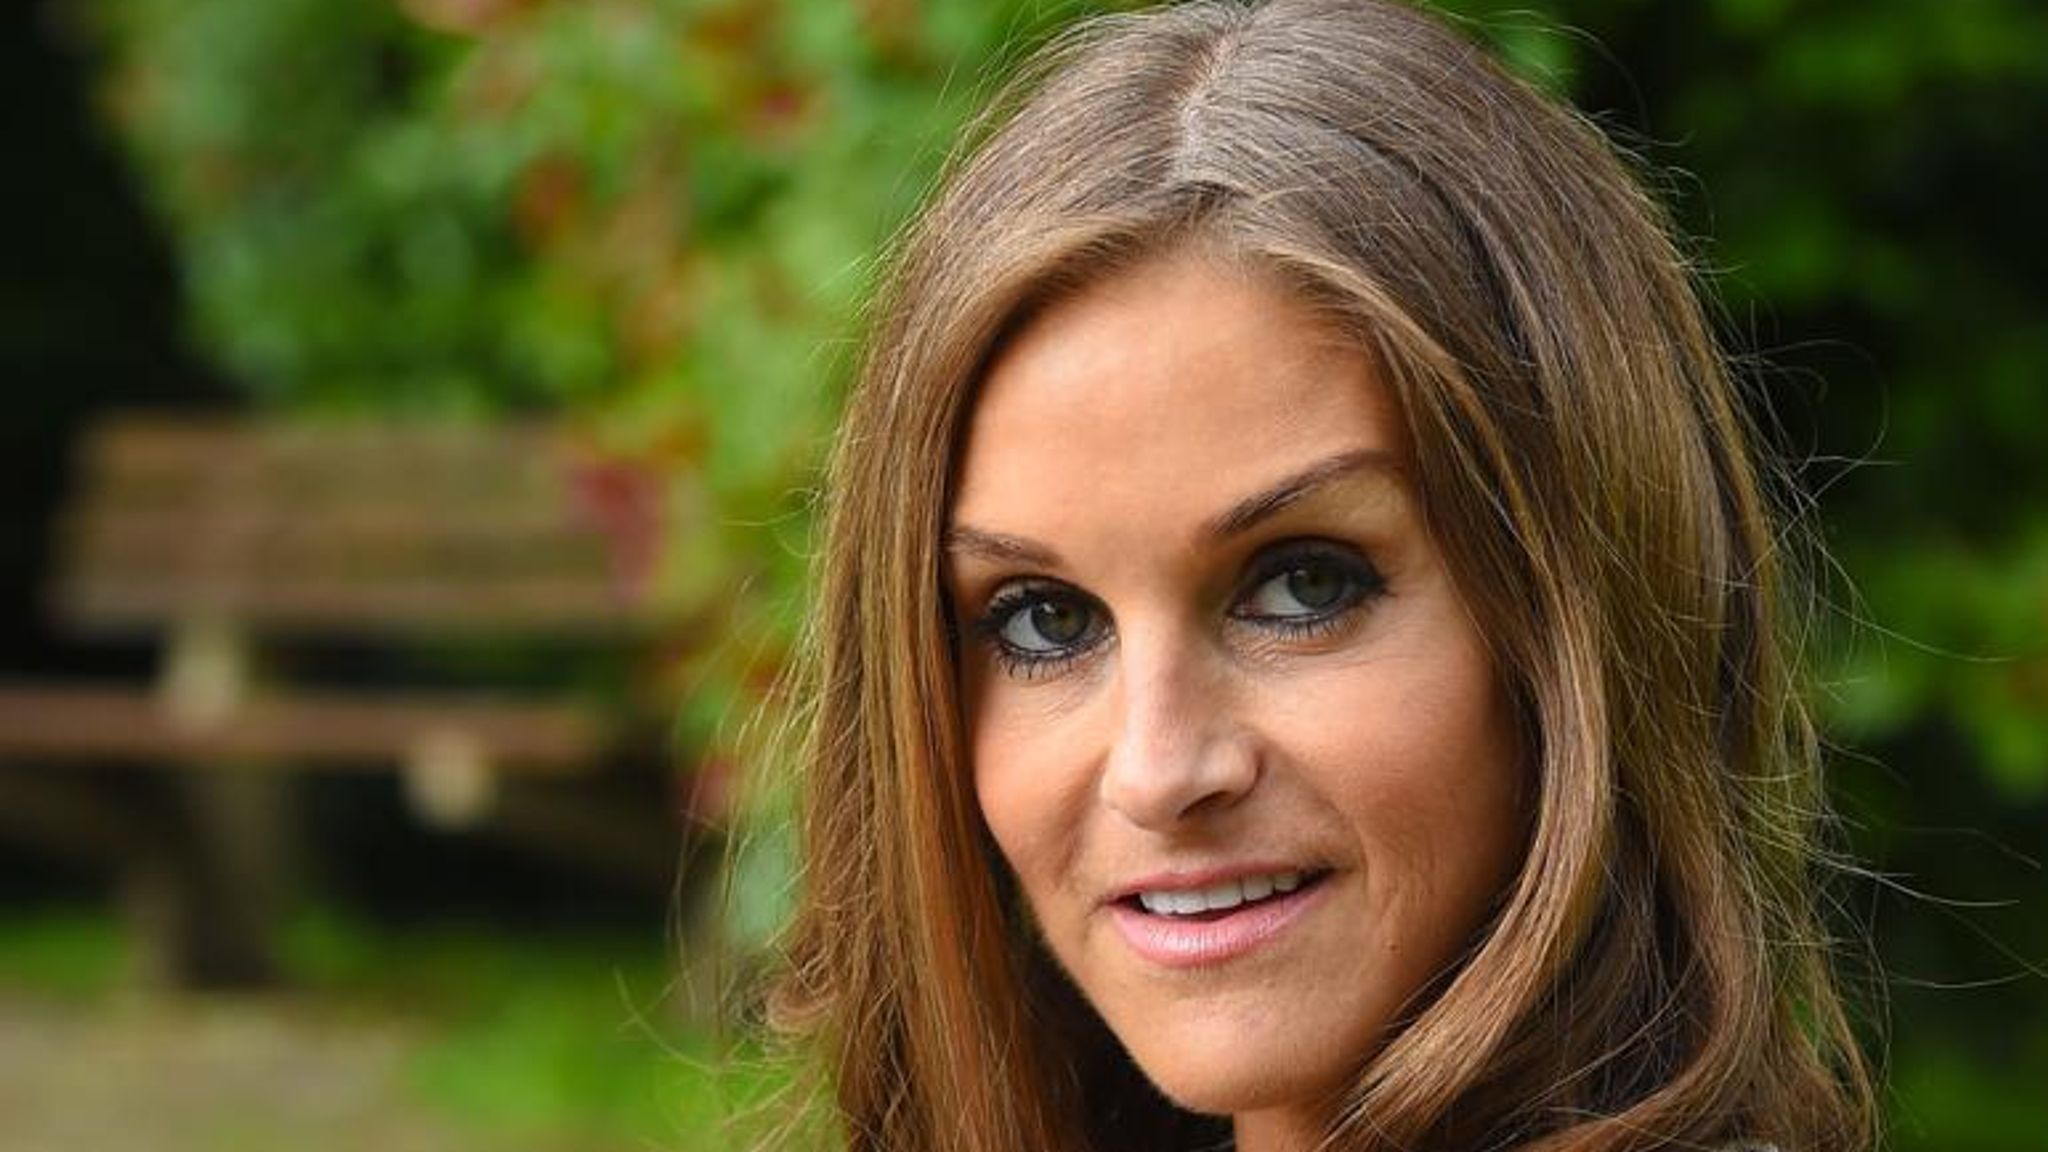 Nikki Grahame Big Brother Contestant Who Found Fame On The Show In 06 Has Died Aged 38 Agent Confirms Ents Arts News Sky News